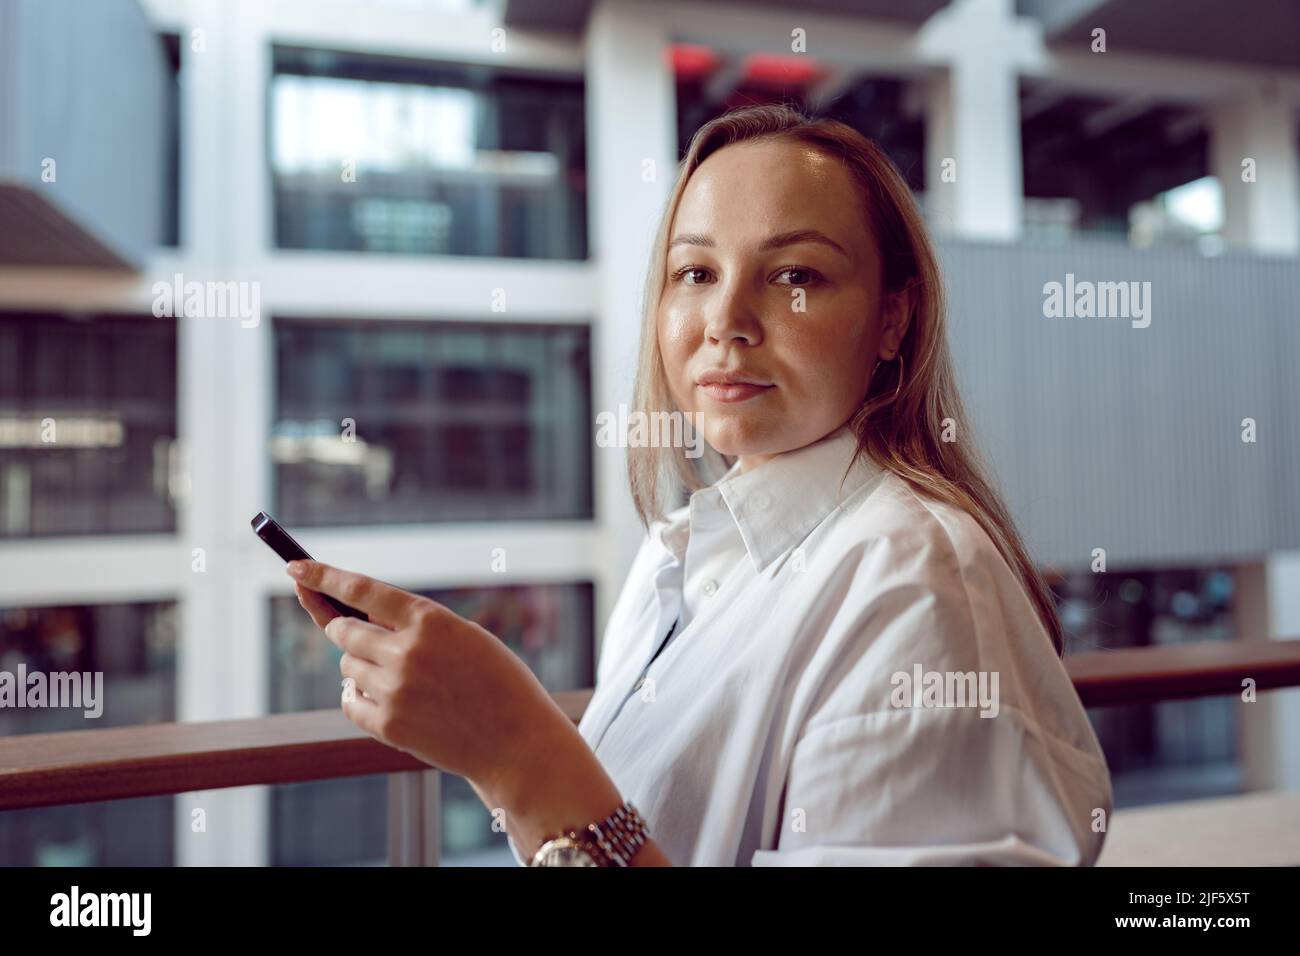 Businesswoman using her mobile phone in the balcony Stock Photo